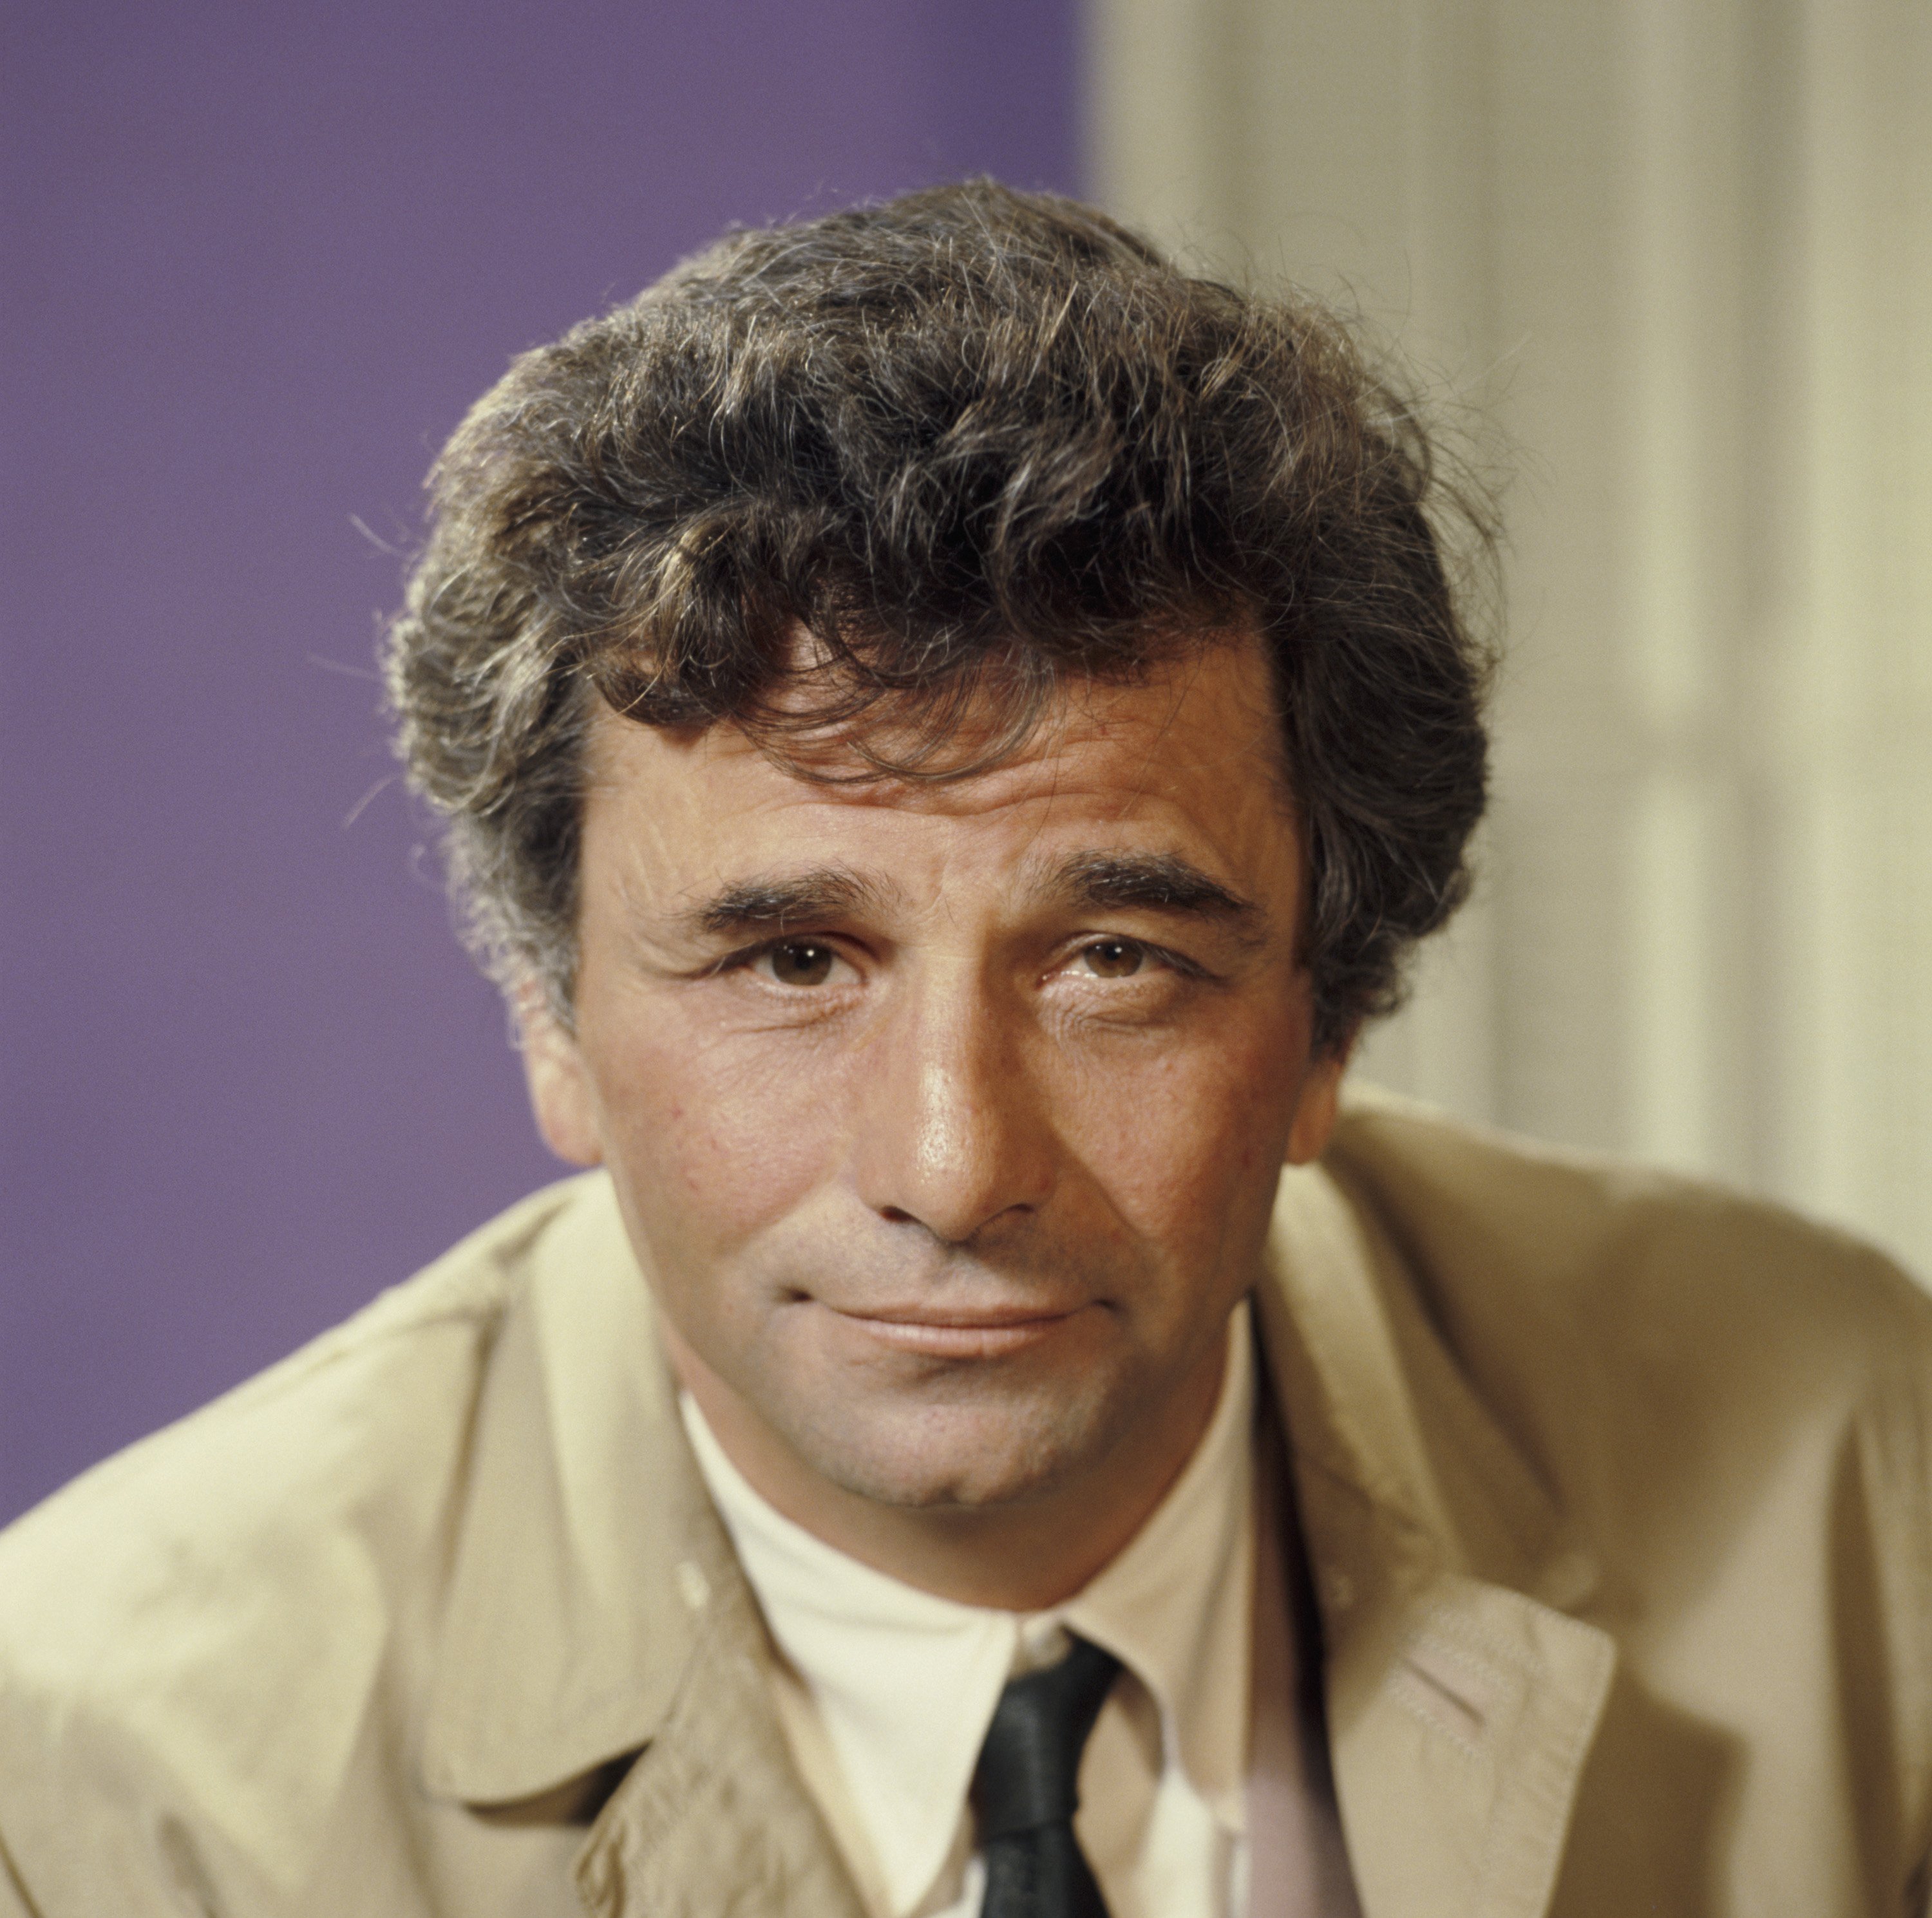 Actor Peter Falk in one of his scenes in "Columbo." | Photo: Getty Images